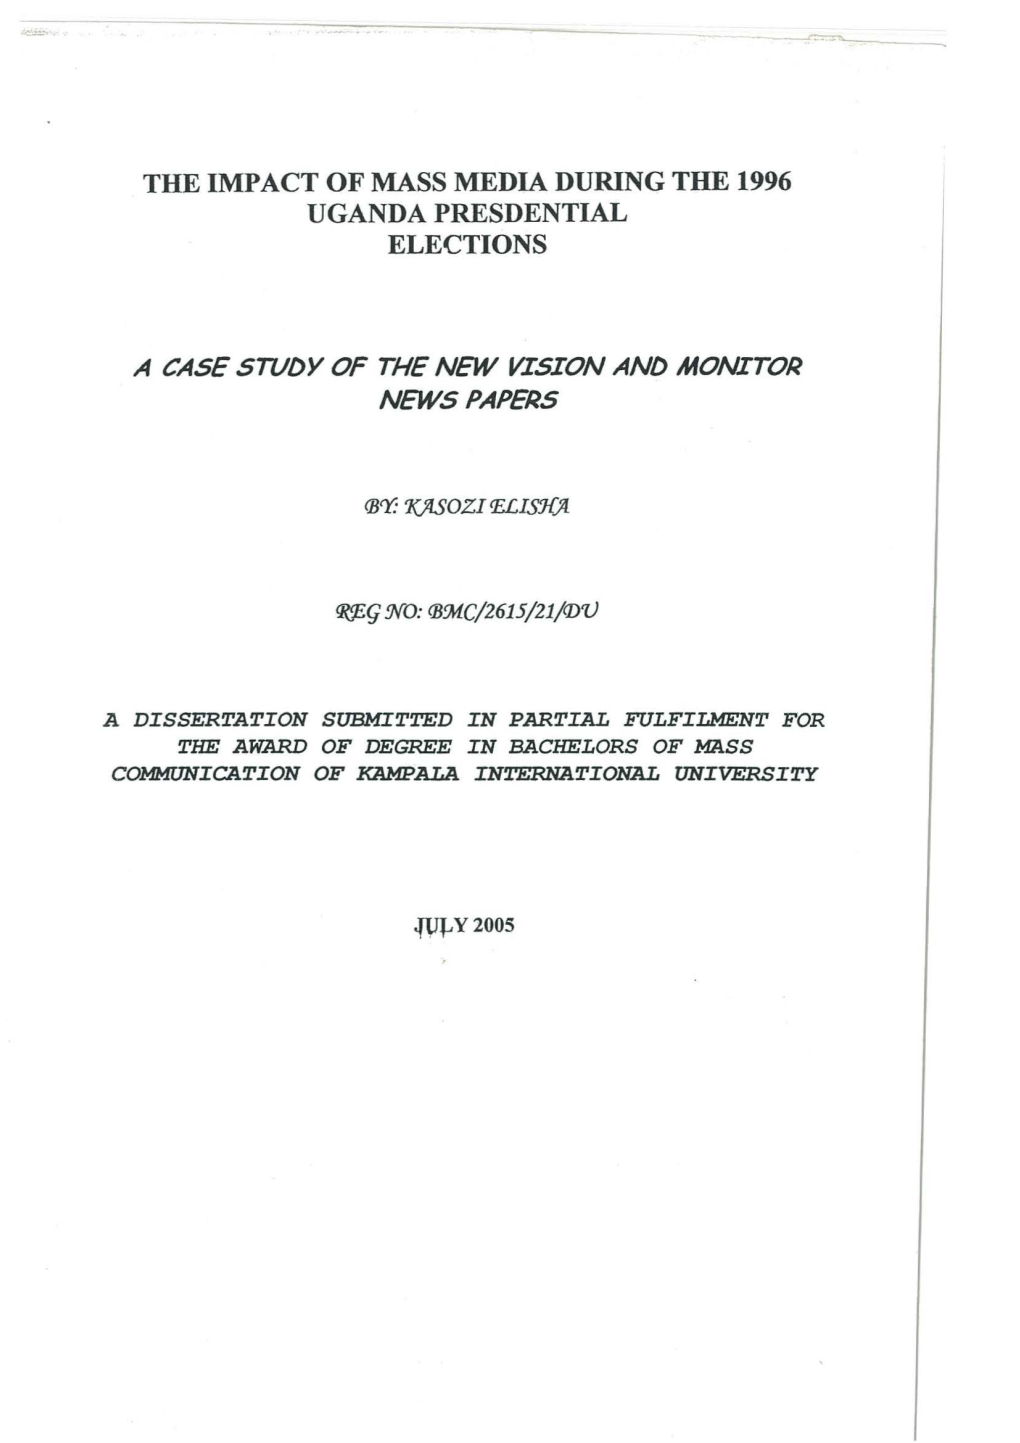 The Impact of Mass Media During the 1996 Uganda Presdential Elections